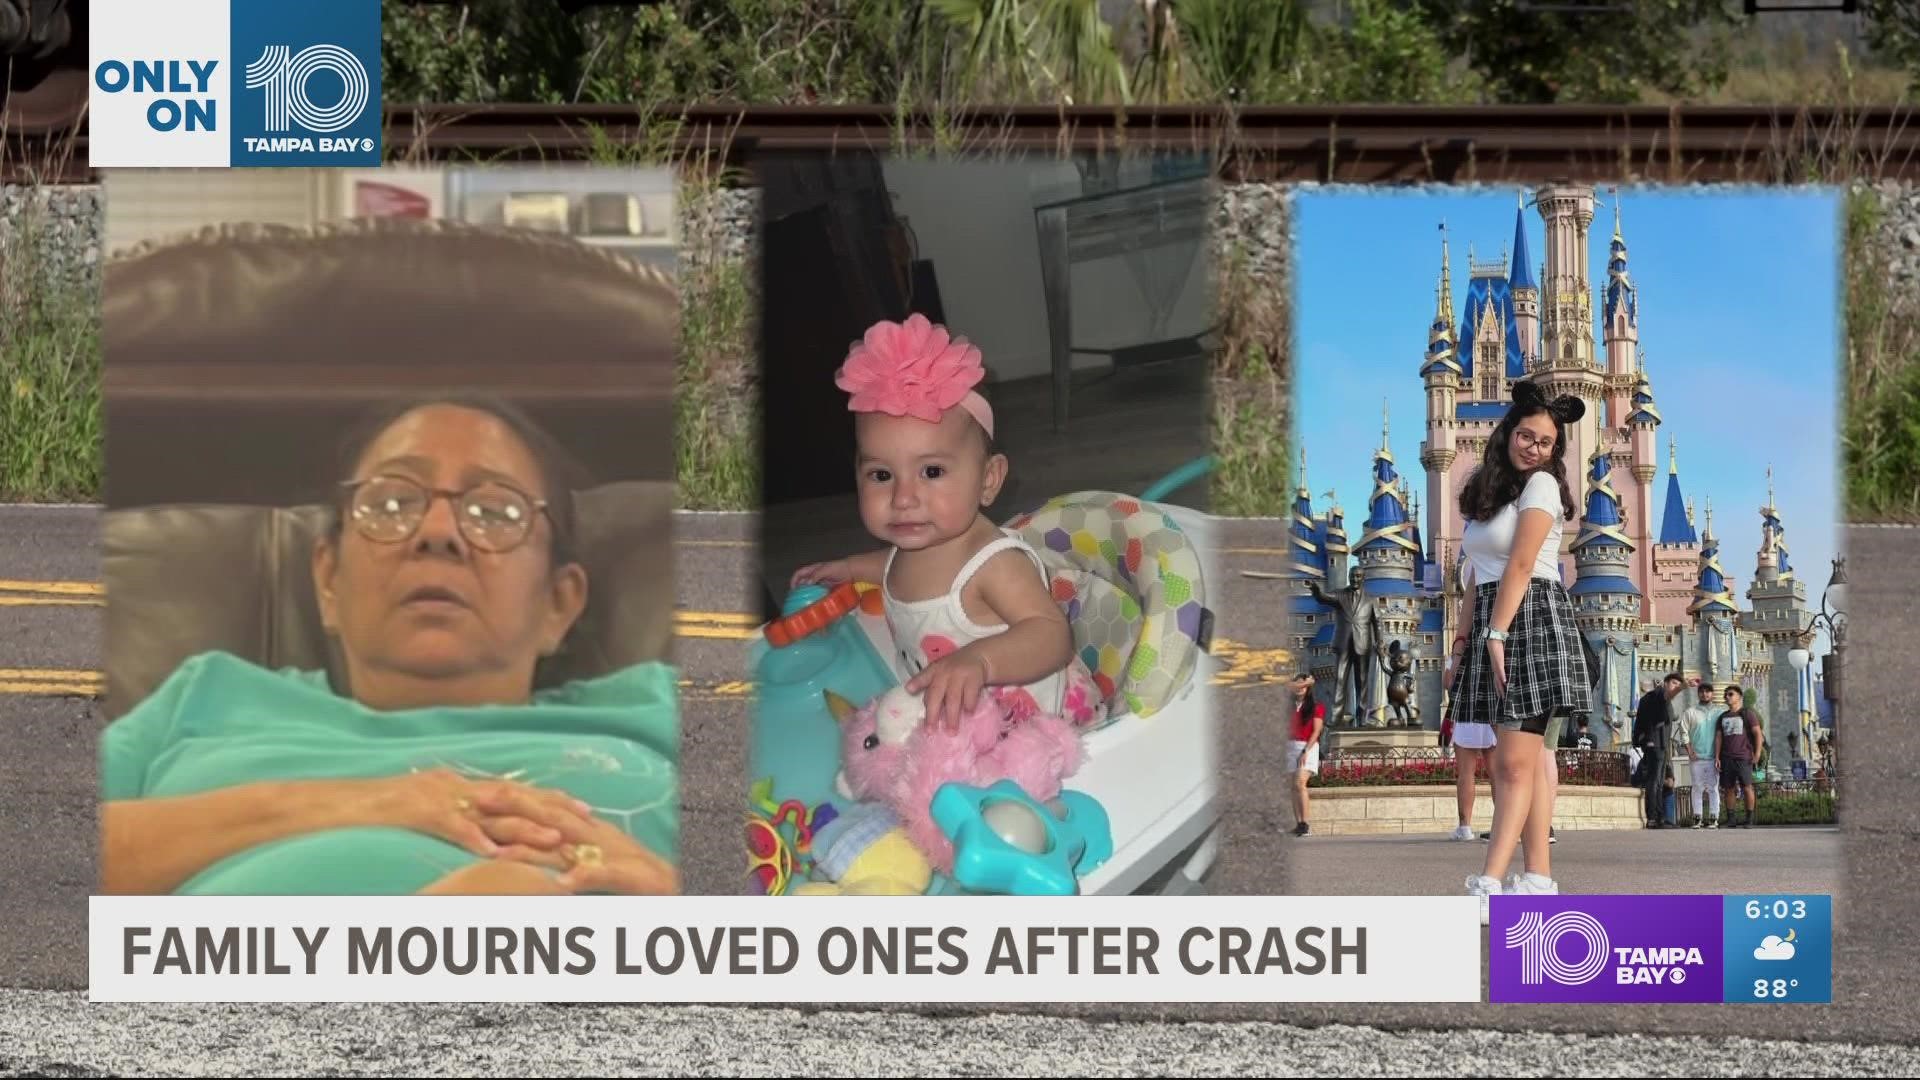 Jose Funes says seven of his family members were heading home from Disney World after celebrating a birthday when the crash happened.